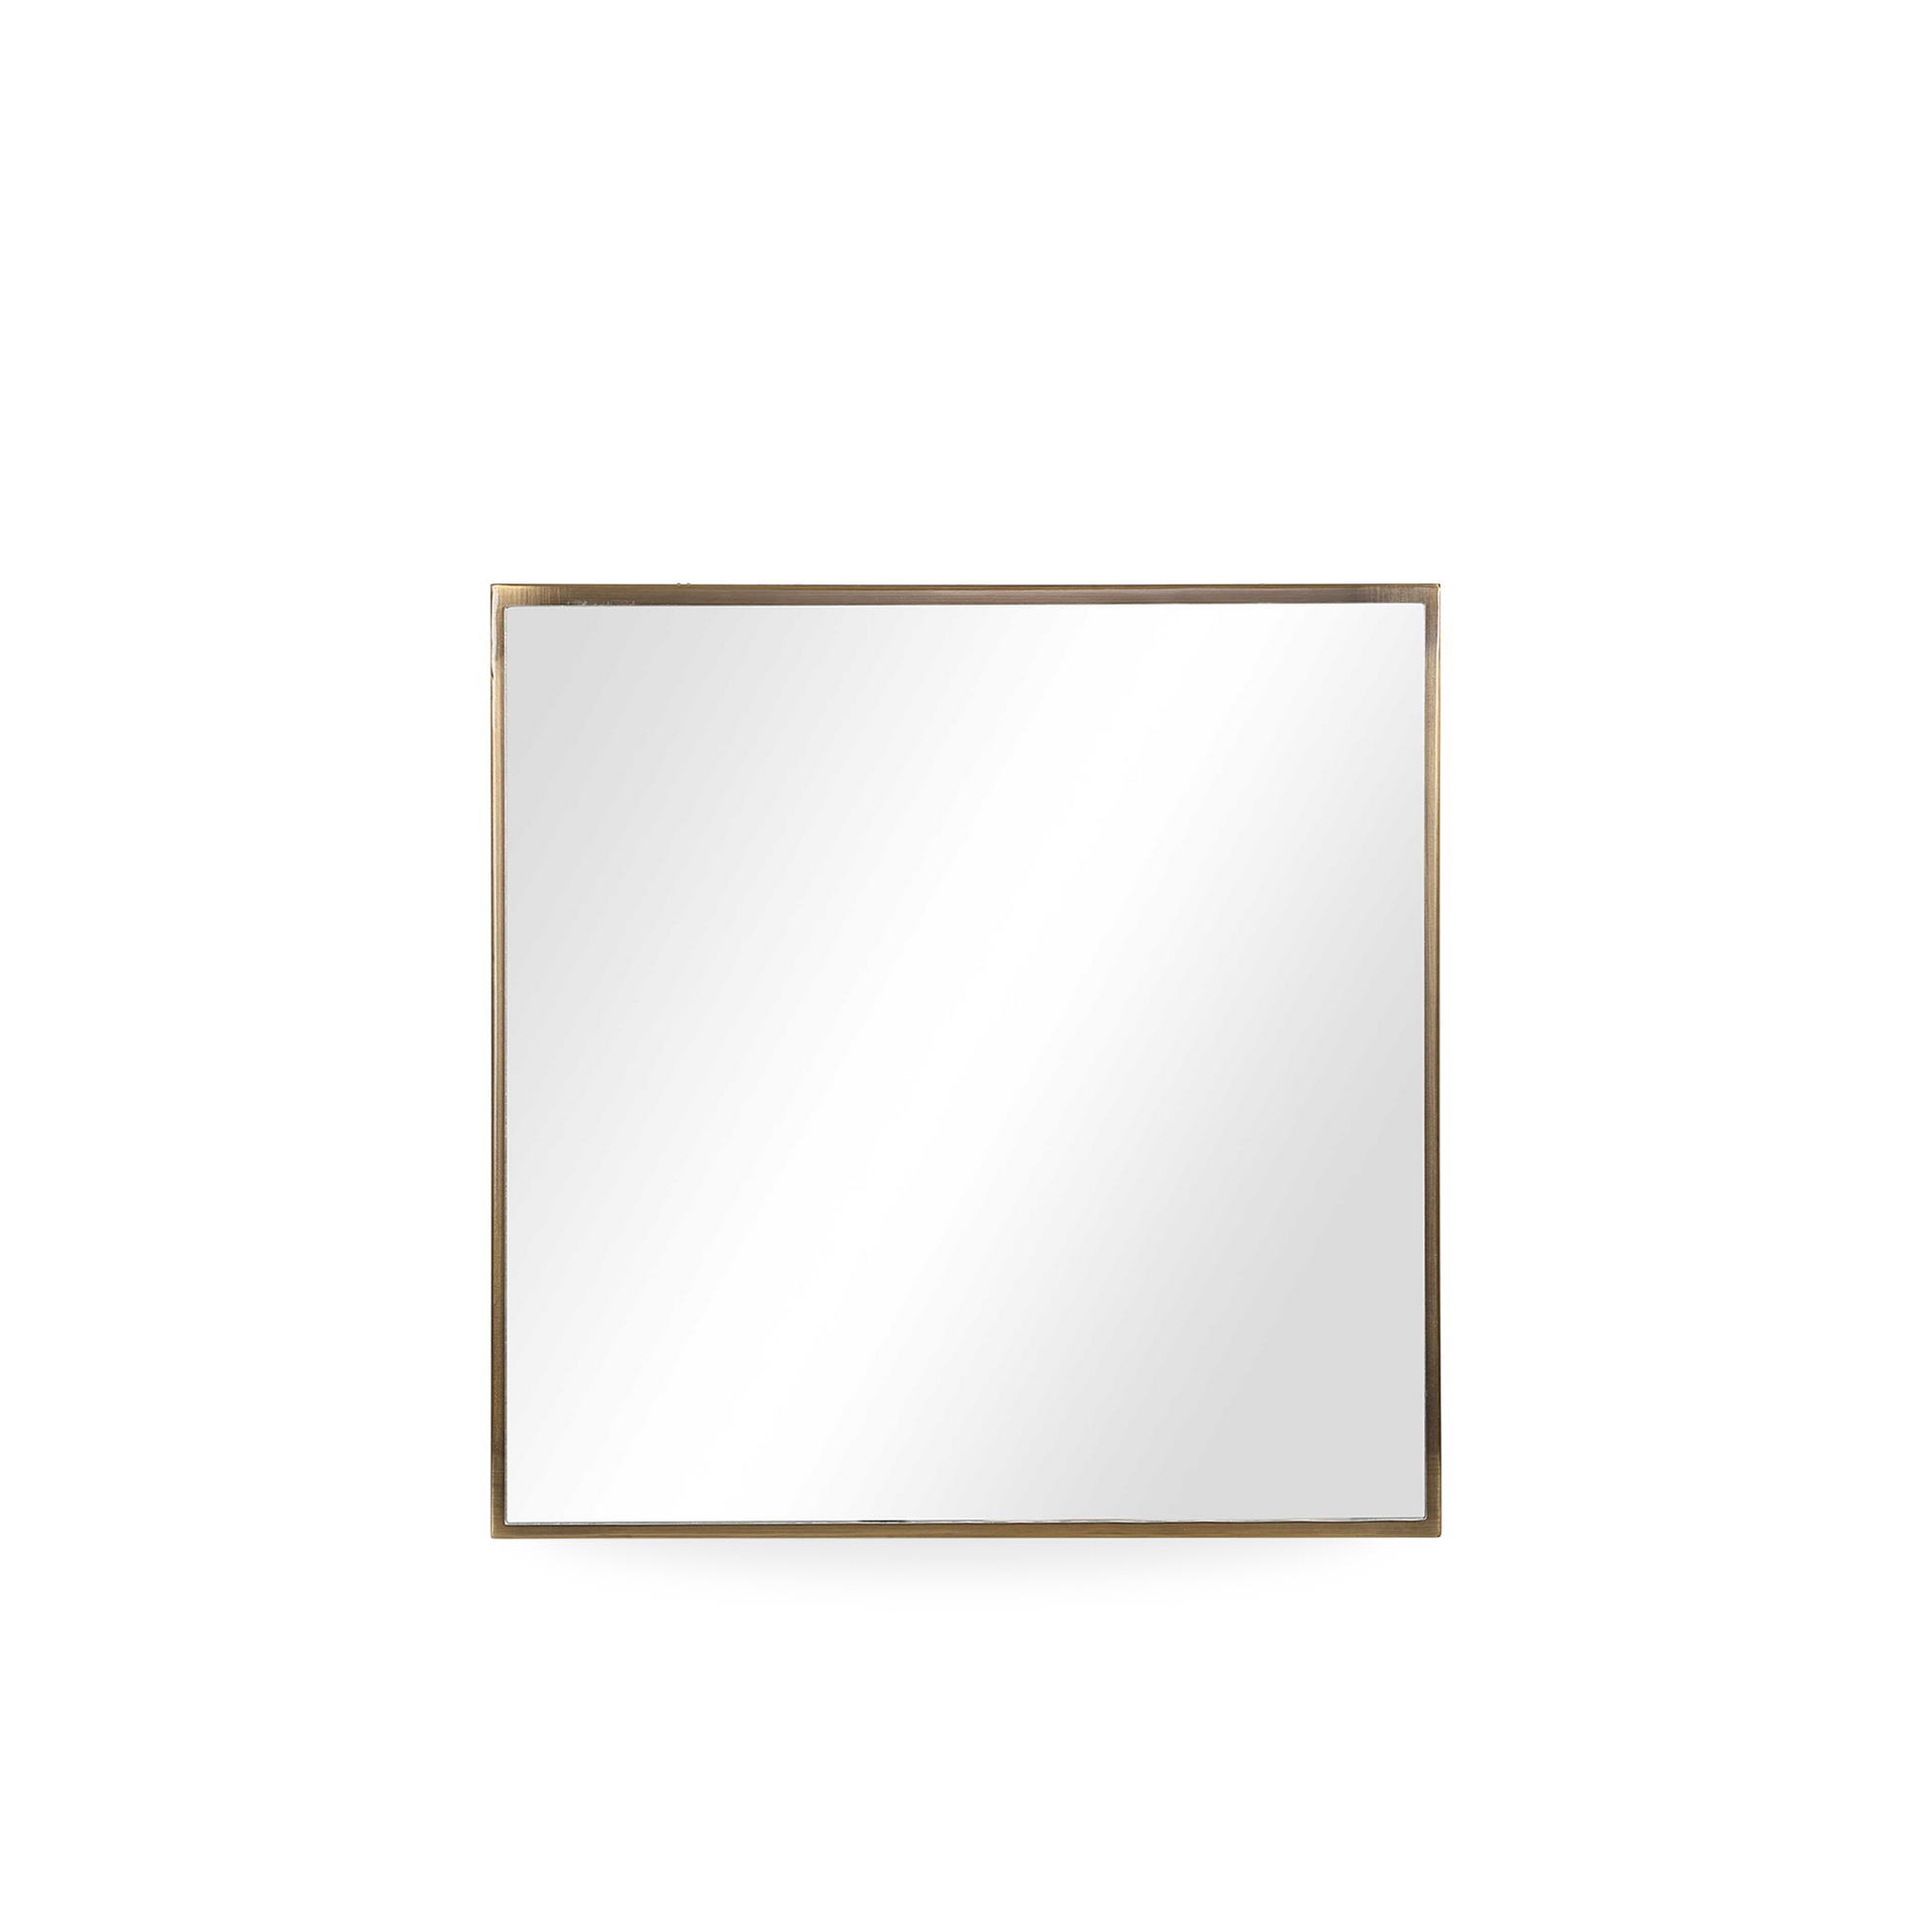 The Shadowbox Square Wall Mirror showcases a clean modern look and a deep profile iron frame with an antique brushed brass finish.